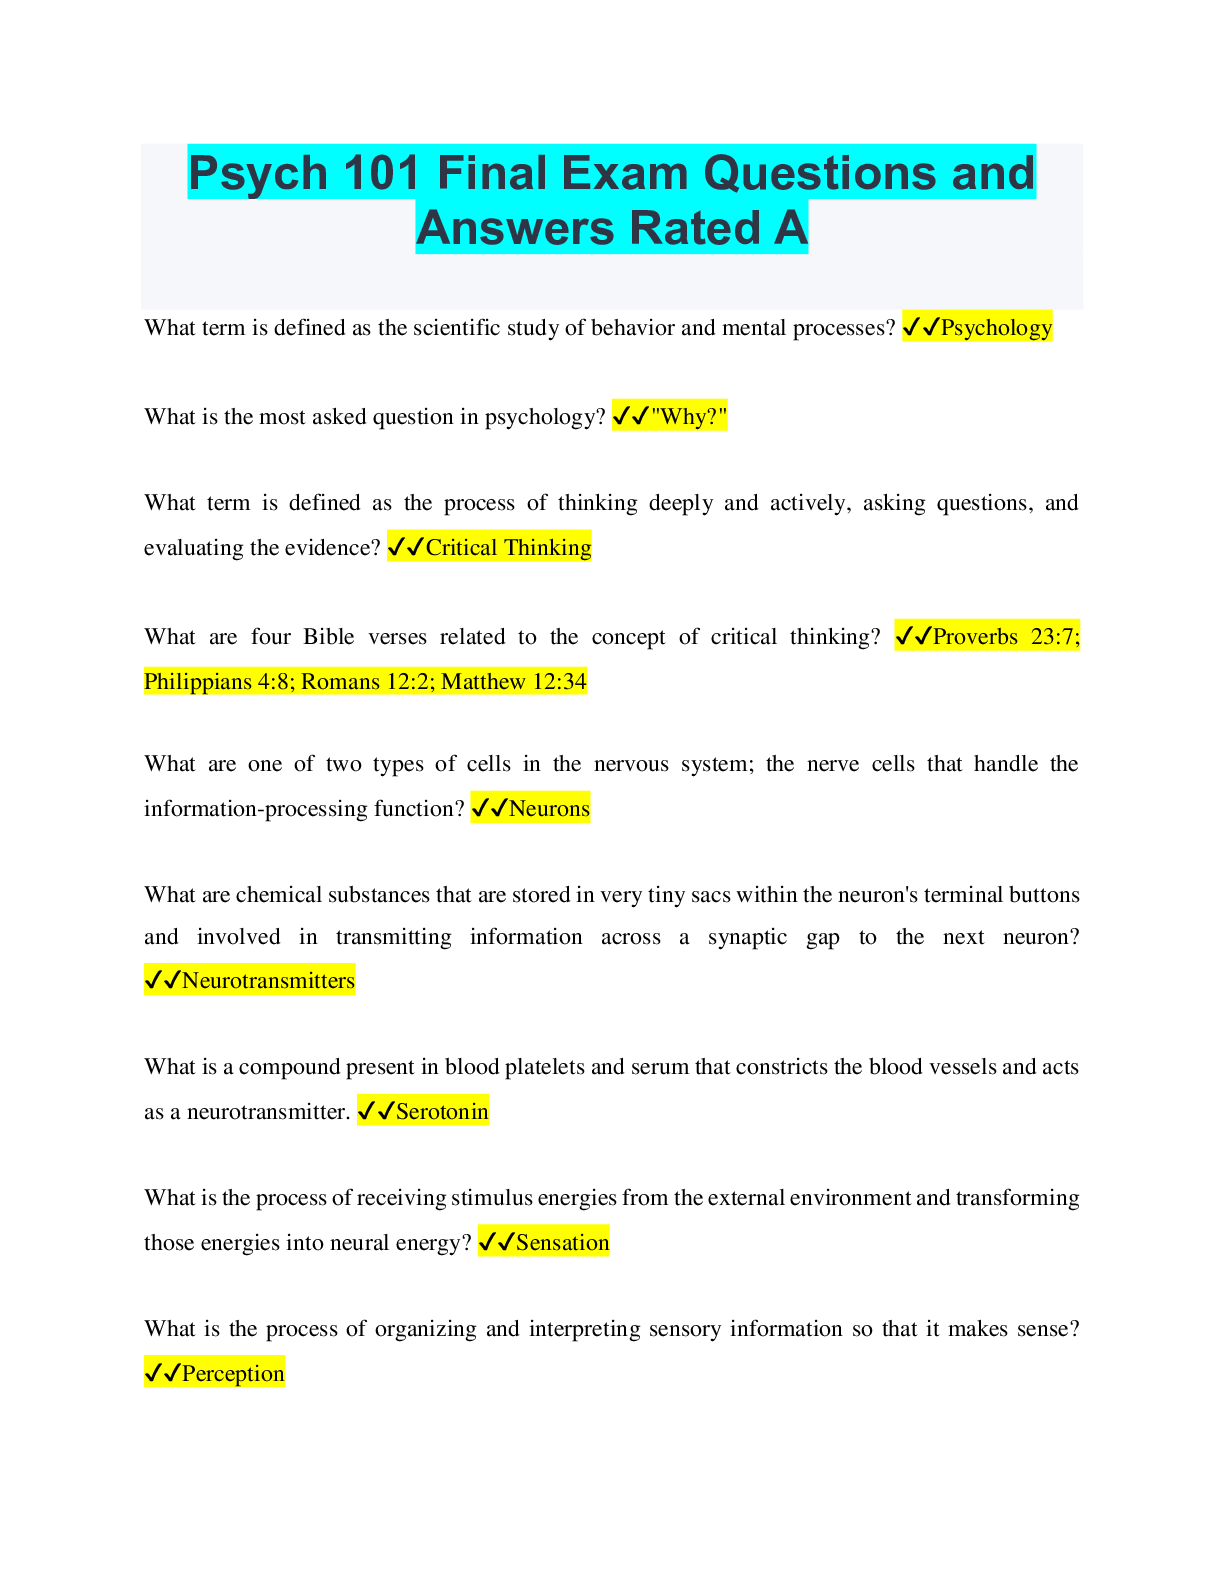 Psych 101 Final Exam Questions and Answers Rated A Browsegrades